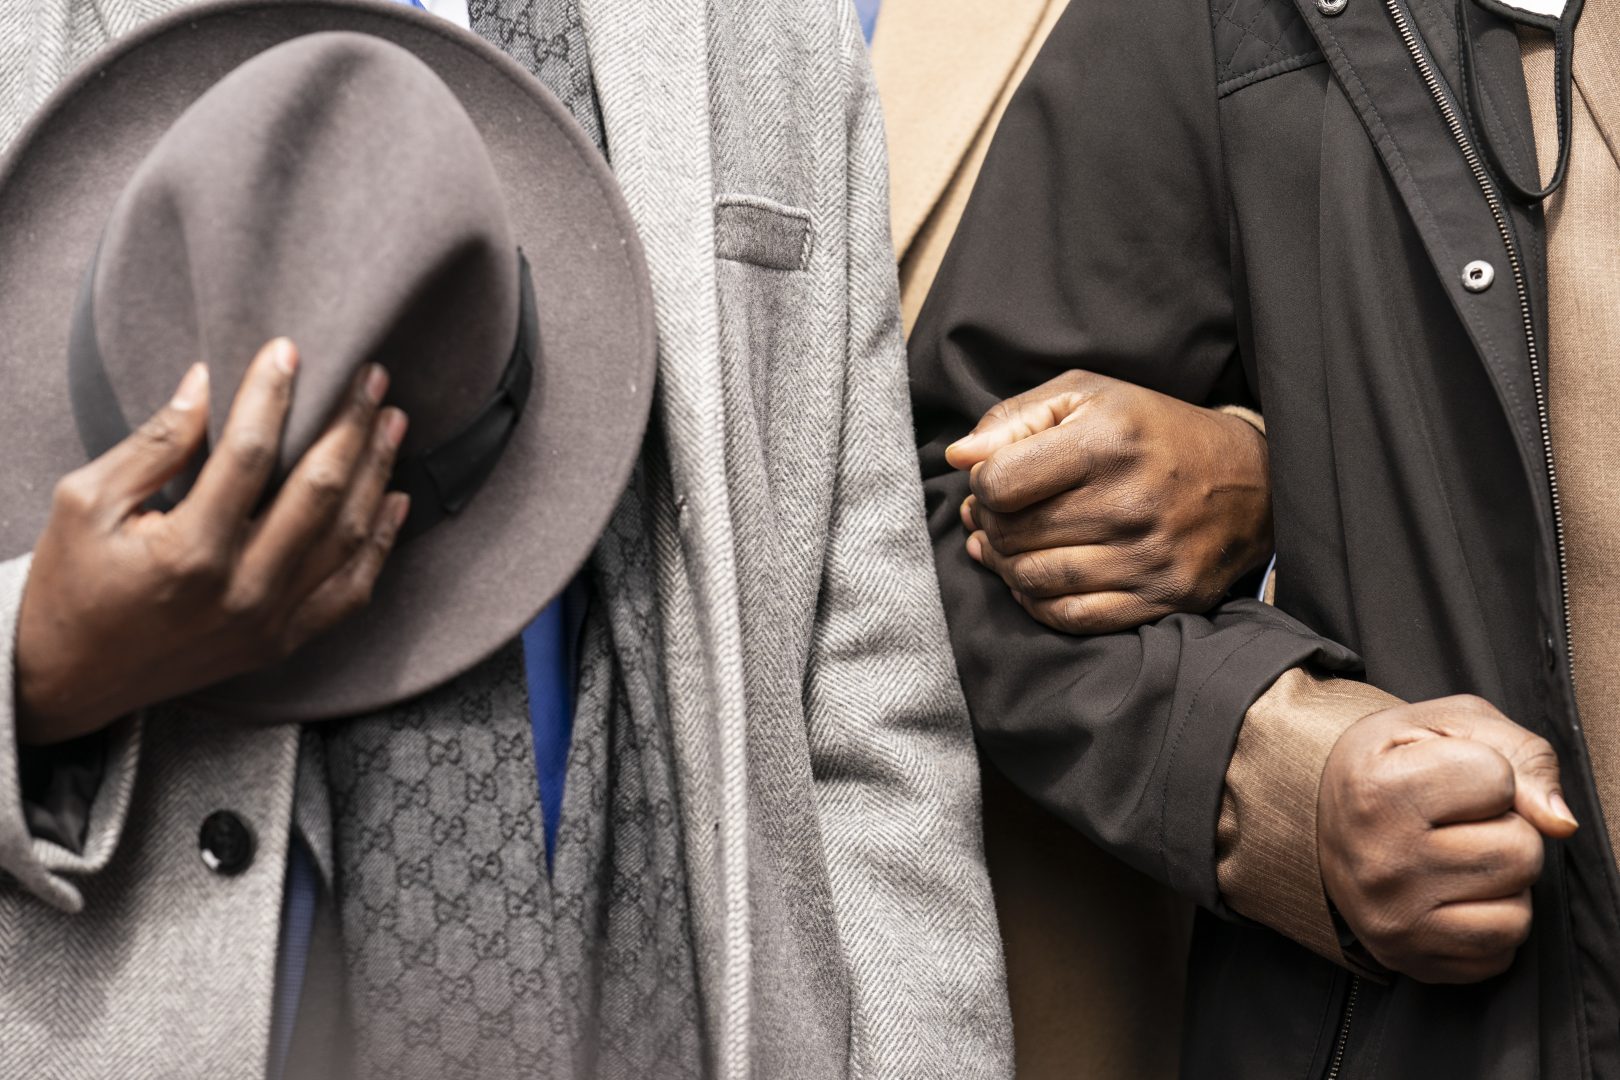 Philonise Floyd, left, and Rodney Floyd, right, brothers of George Floyd, lock arms during a prayer alongside attorney Ben Crump, left, during a news conference outside the Hennepin County Government Center before the murder trial against former Minneapolis police officer Derek Chauvin in the killing of George Floyd advances to jury deliberations, Monday, April 19, 2021, in Minneapolis.